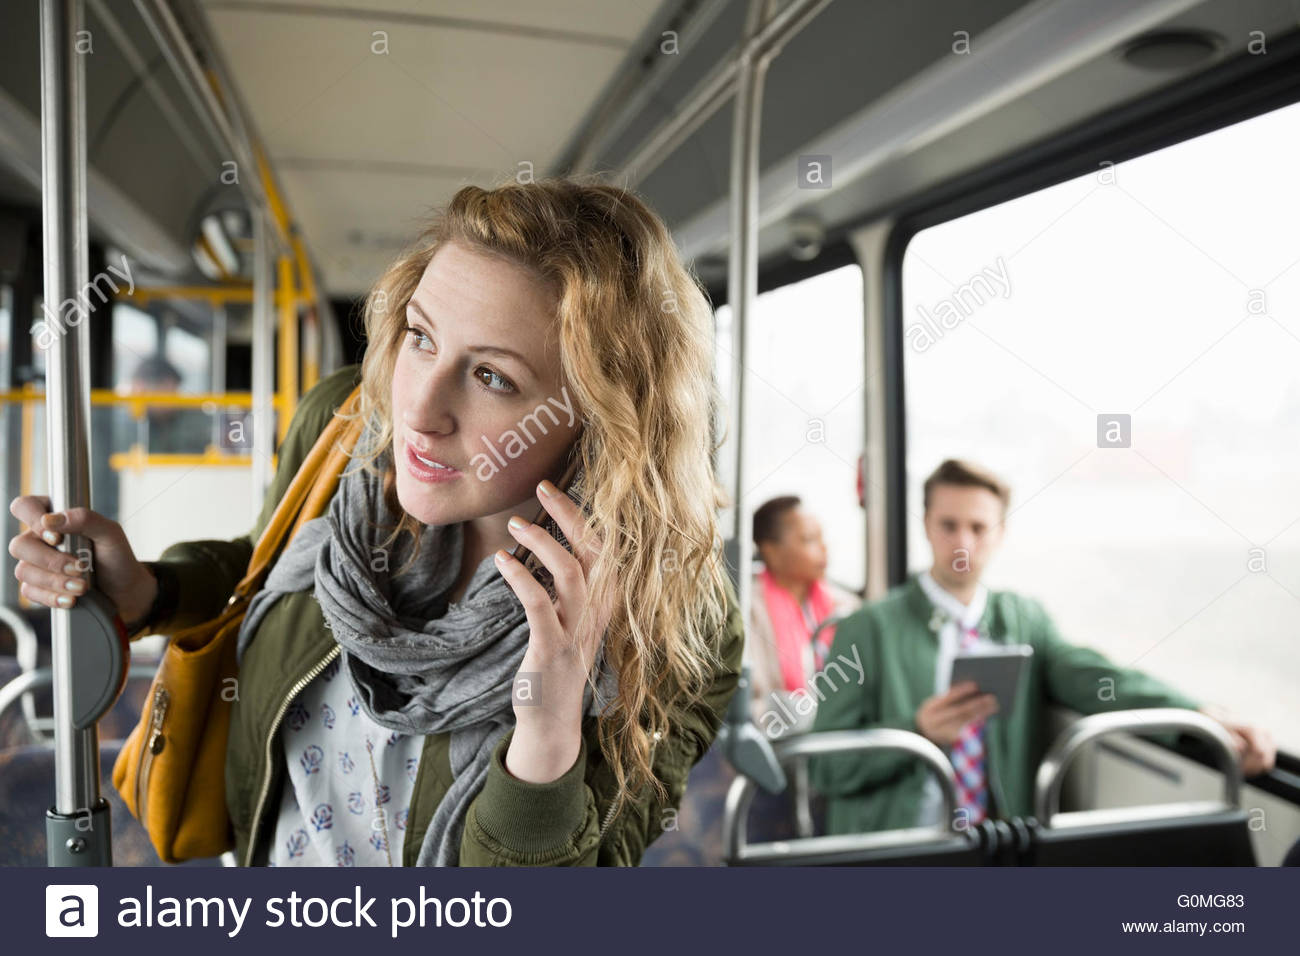 Woman talking on cell phone on bus Stock Photo